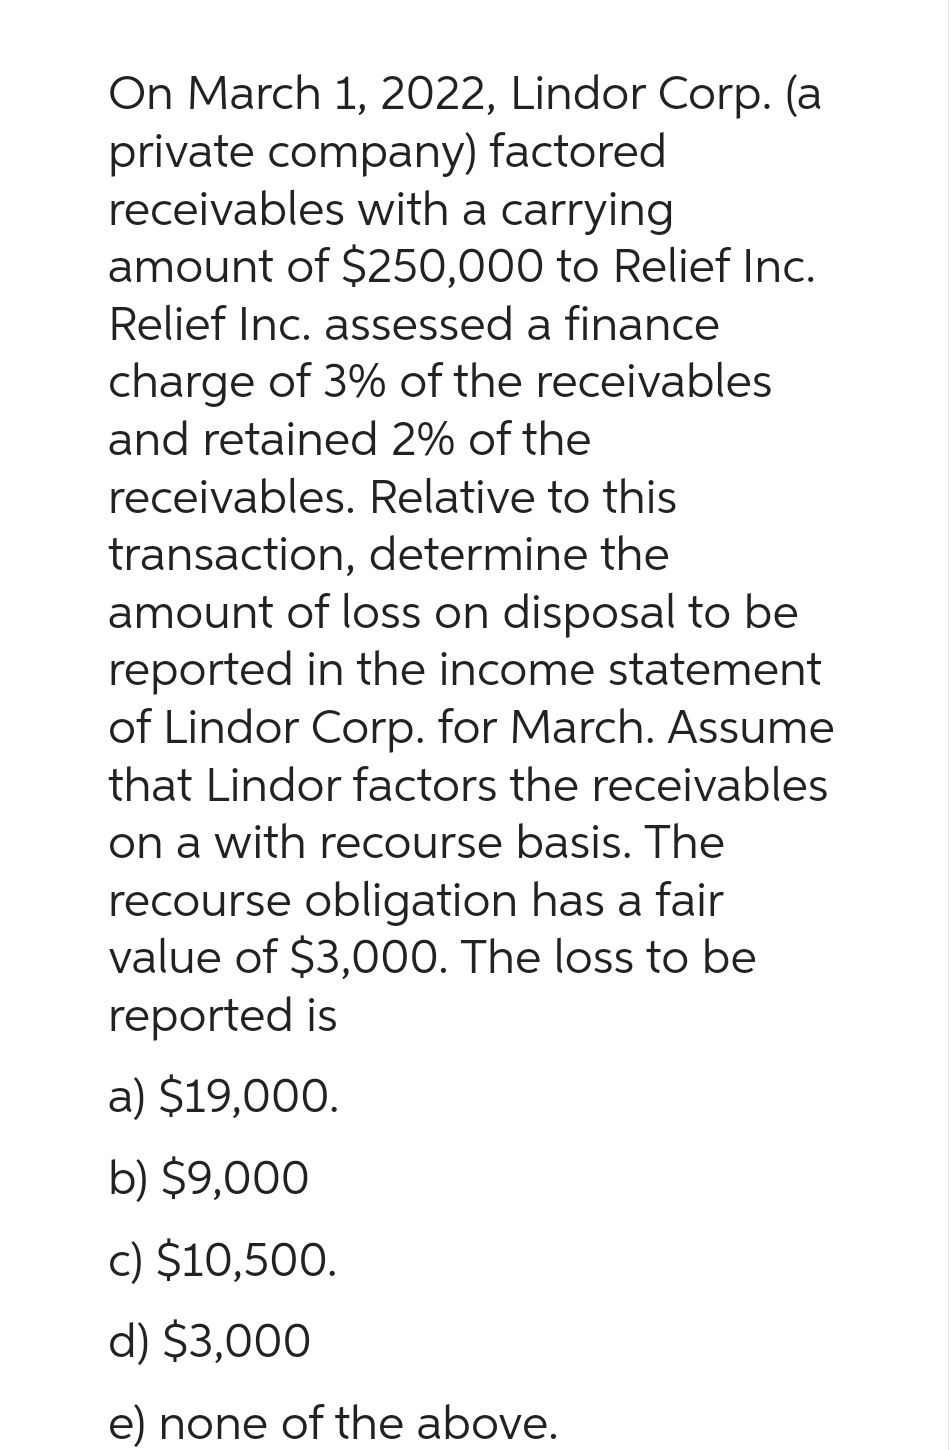 On March 1, 2022, Lindor Corp. (a
private company) factored
receivables with a carrying
amount of $250,000 to Relief Inc.
Relief Inc. assessed a finance
charge of 3% of the receivables
and retained 2% of the
receivables. Relative to this
transaction, determine the
amount of loss on disposal to be
reported in the income statement
of Lindor Corp. for March. Assume
that Lindor factors the receivables
on a with recourse basis. The
recourse obligation has a fair
value of $3,000. The loss to be
reported is
a) $19,000.
b) $9,000
c) $10,500.
d) $3,000
e) none of the above.